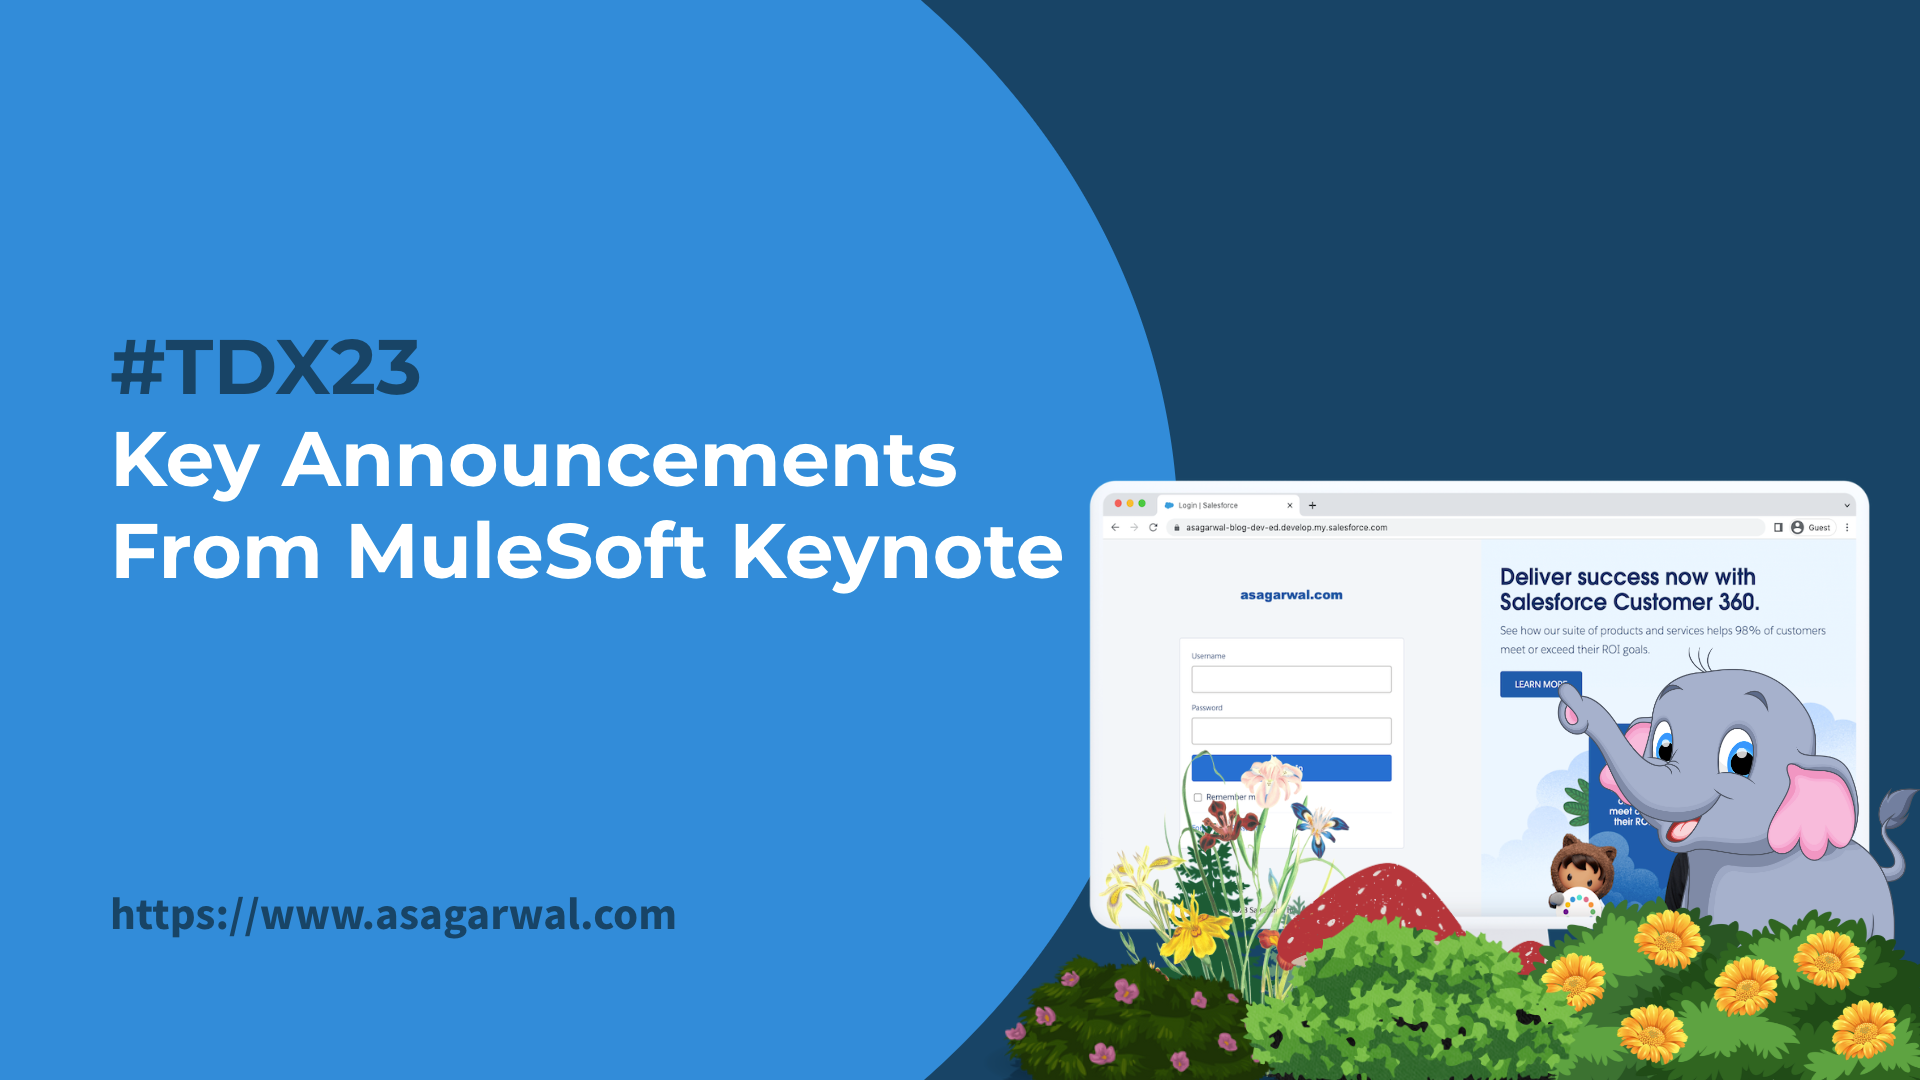 #TDX23 - Key Announcements From MuleSoft Keynote